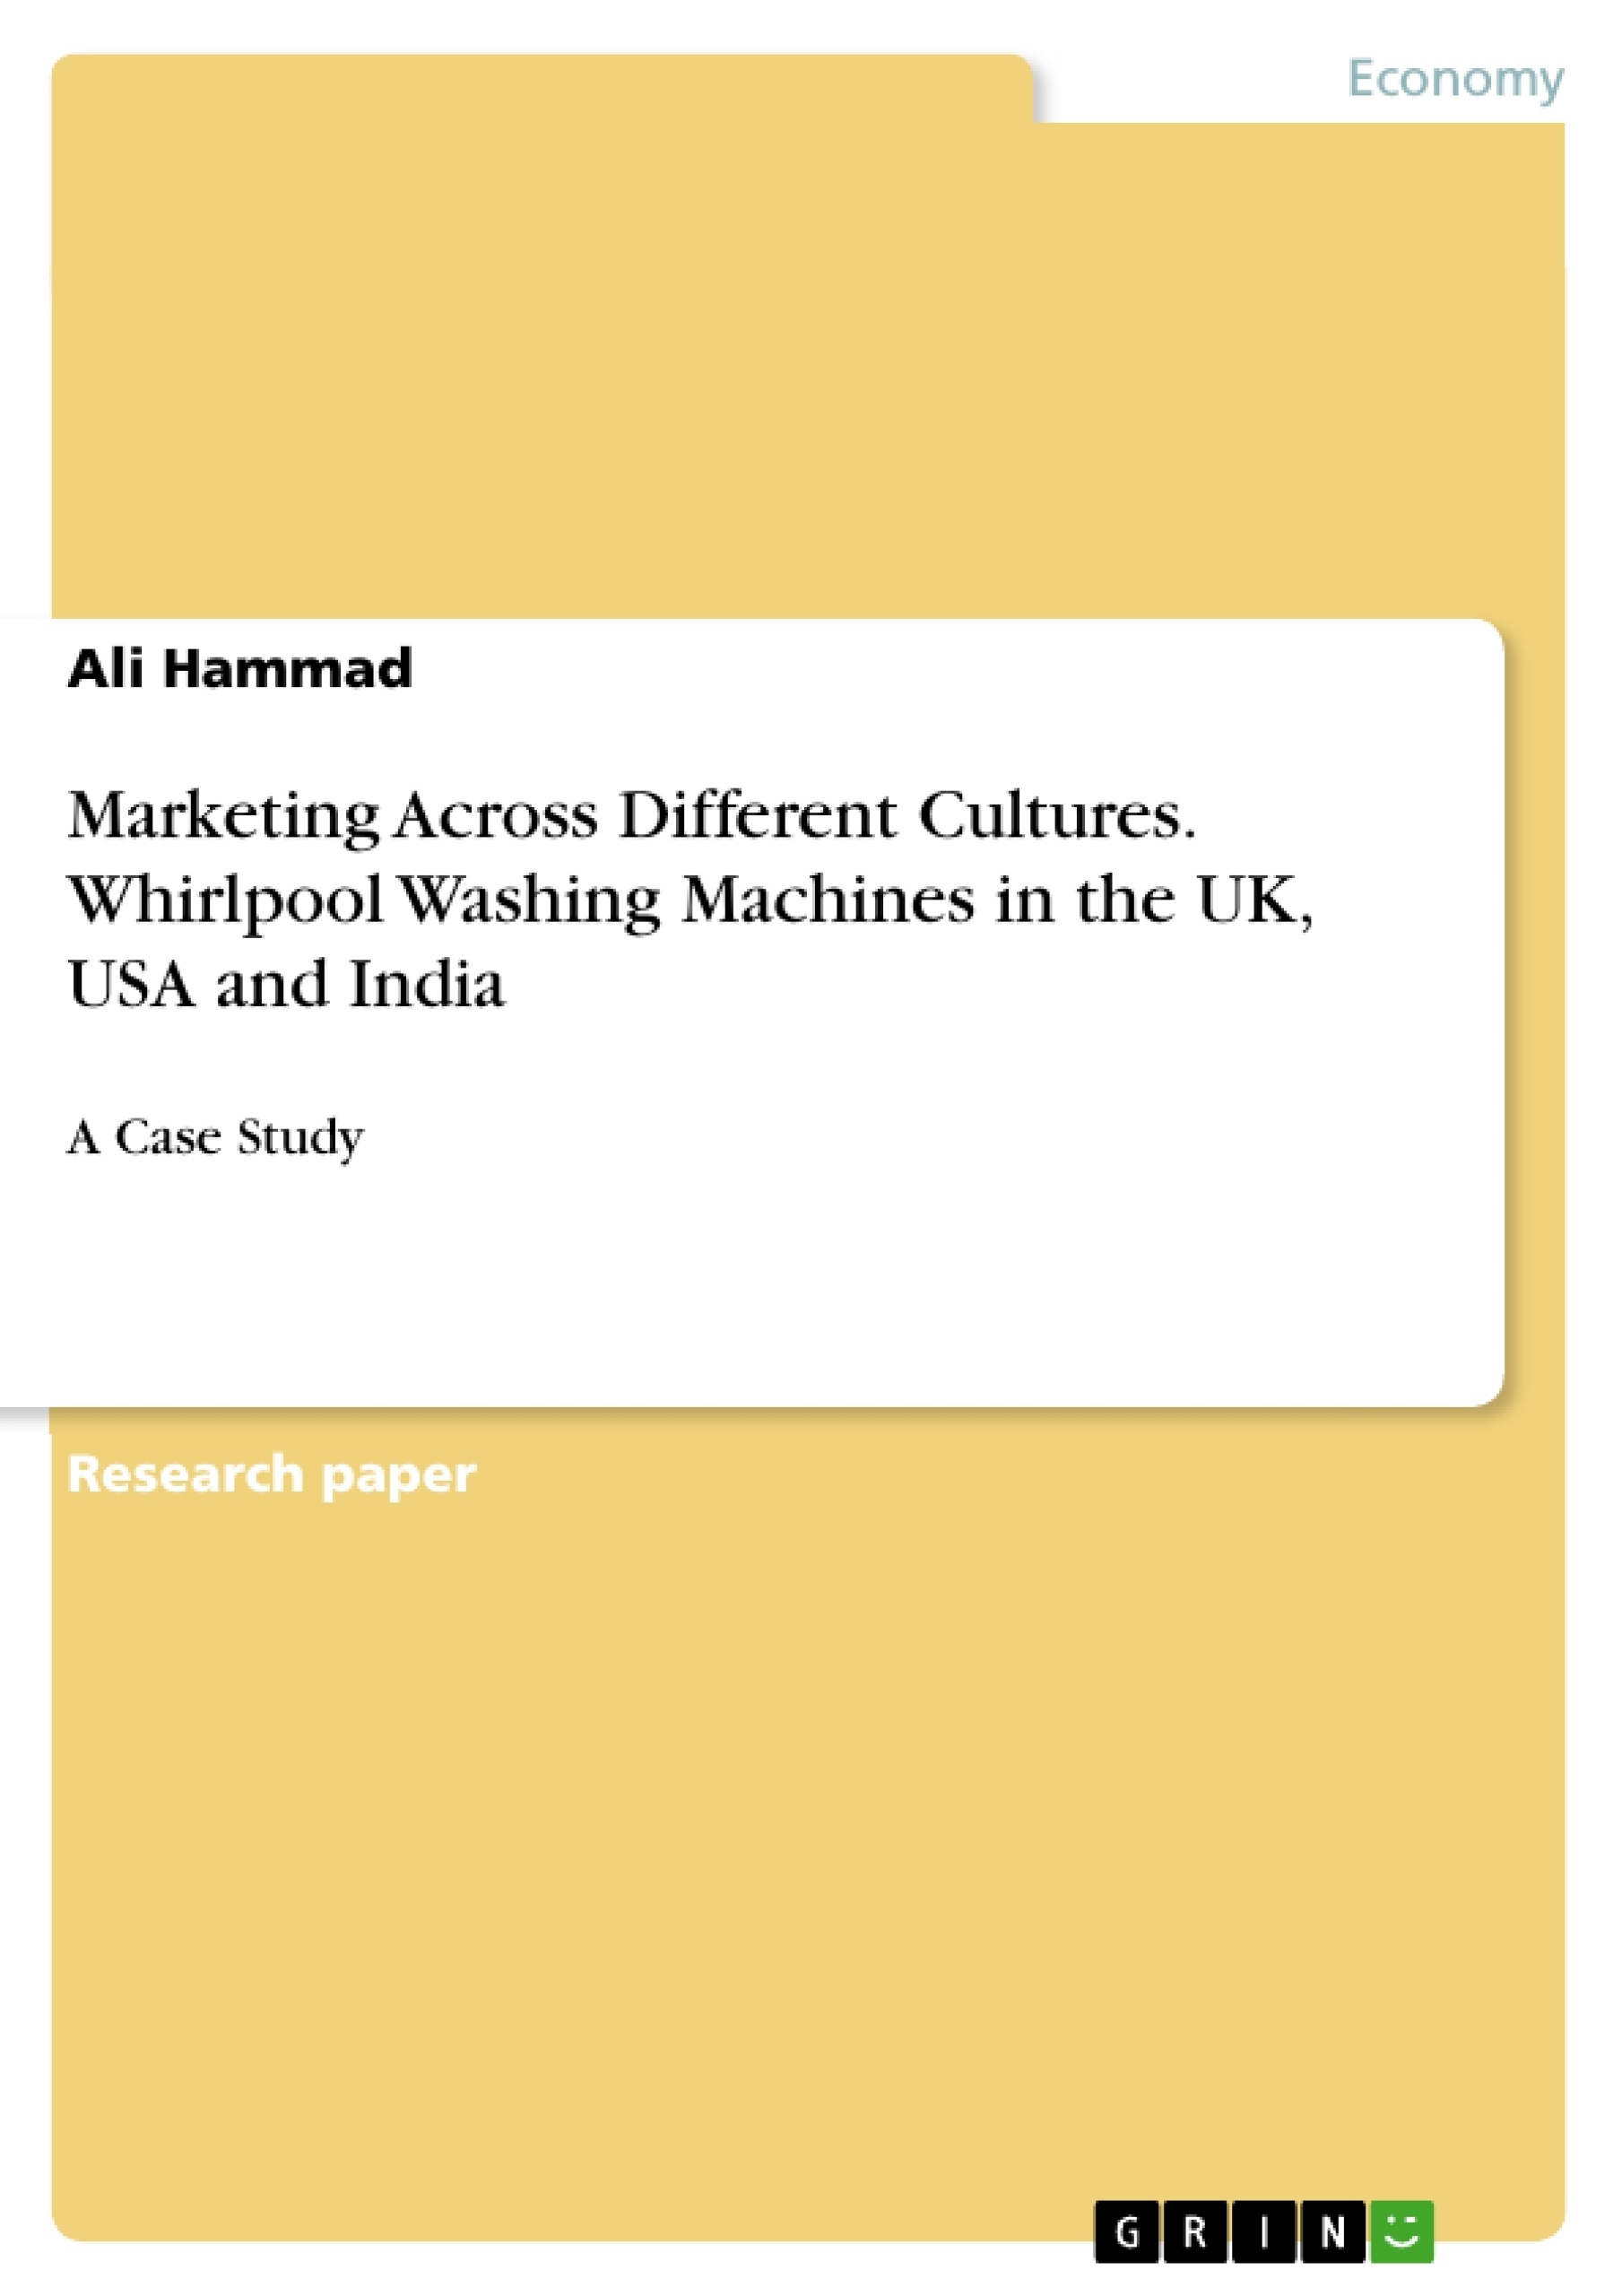 Titre: Marketing Across Different Cultures. Whirlpool Washing Machines in the UK, USA and India